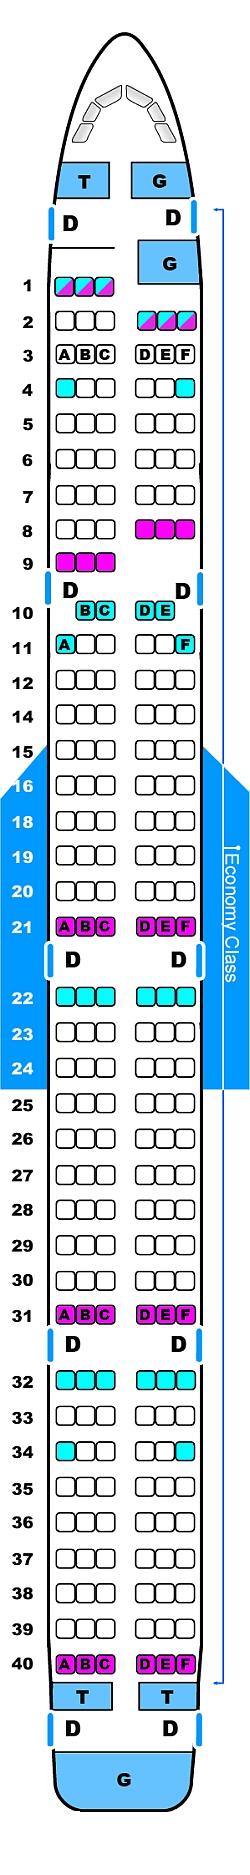 Seat map for Air Poland Boeing B757 200ER